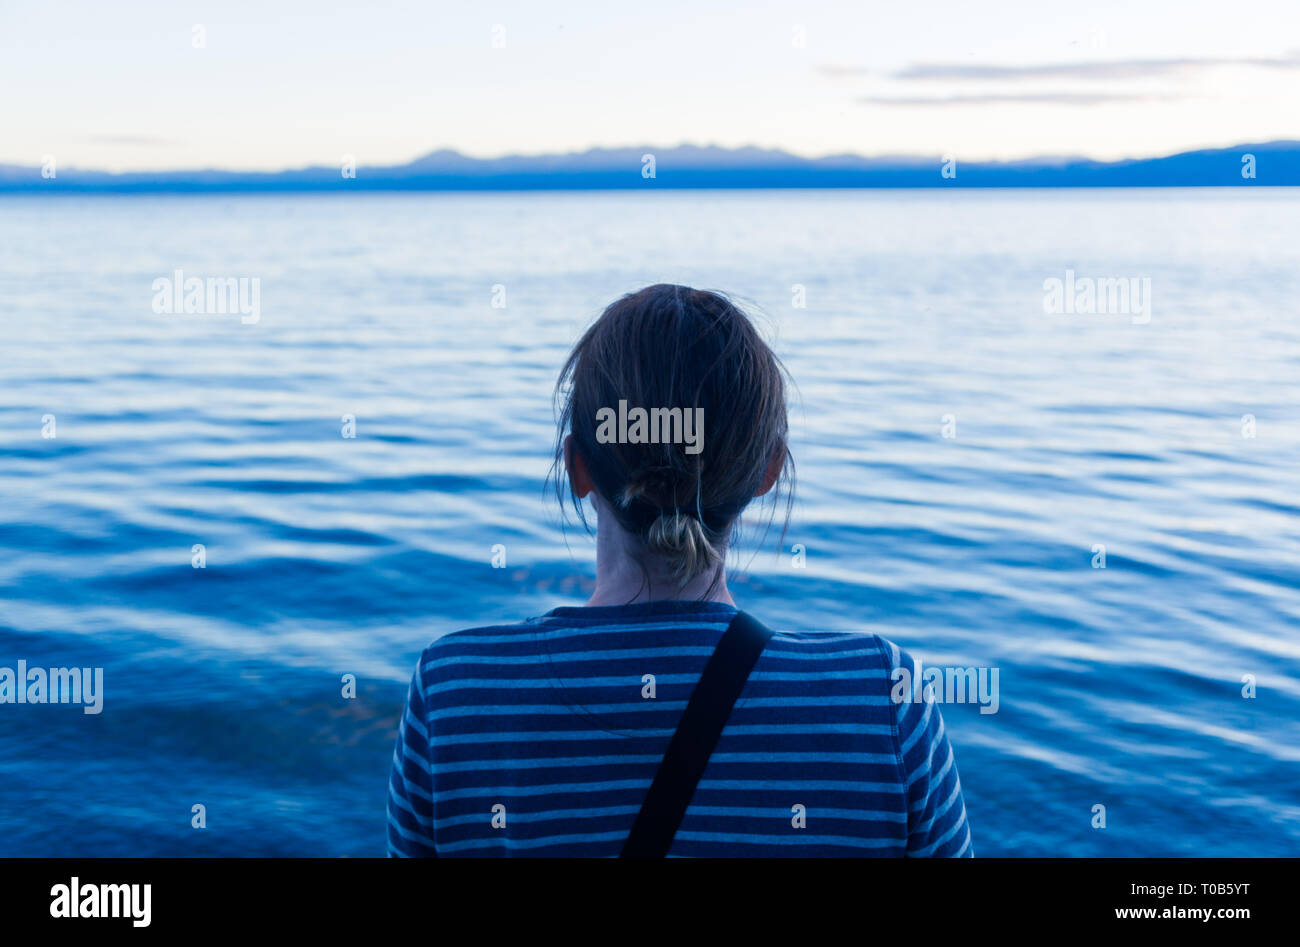 A middle-aged woman sitting and thinking by the water Stock Photo